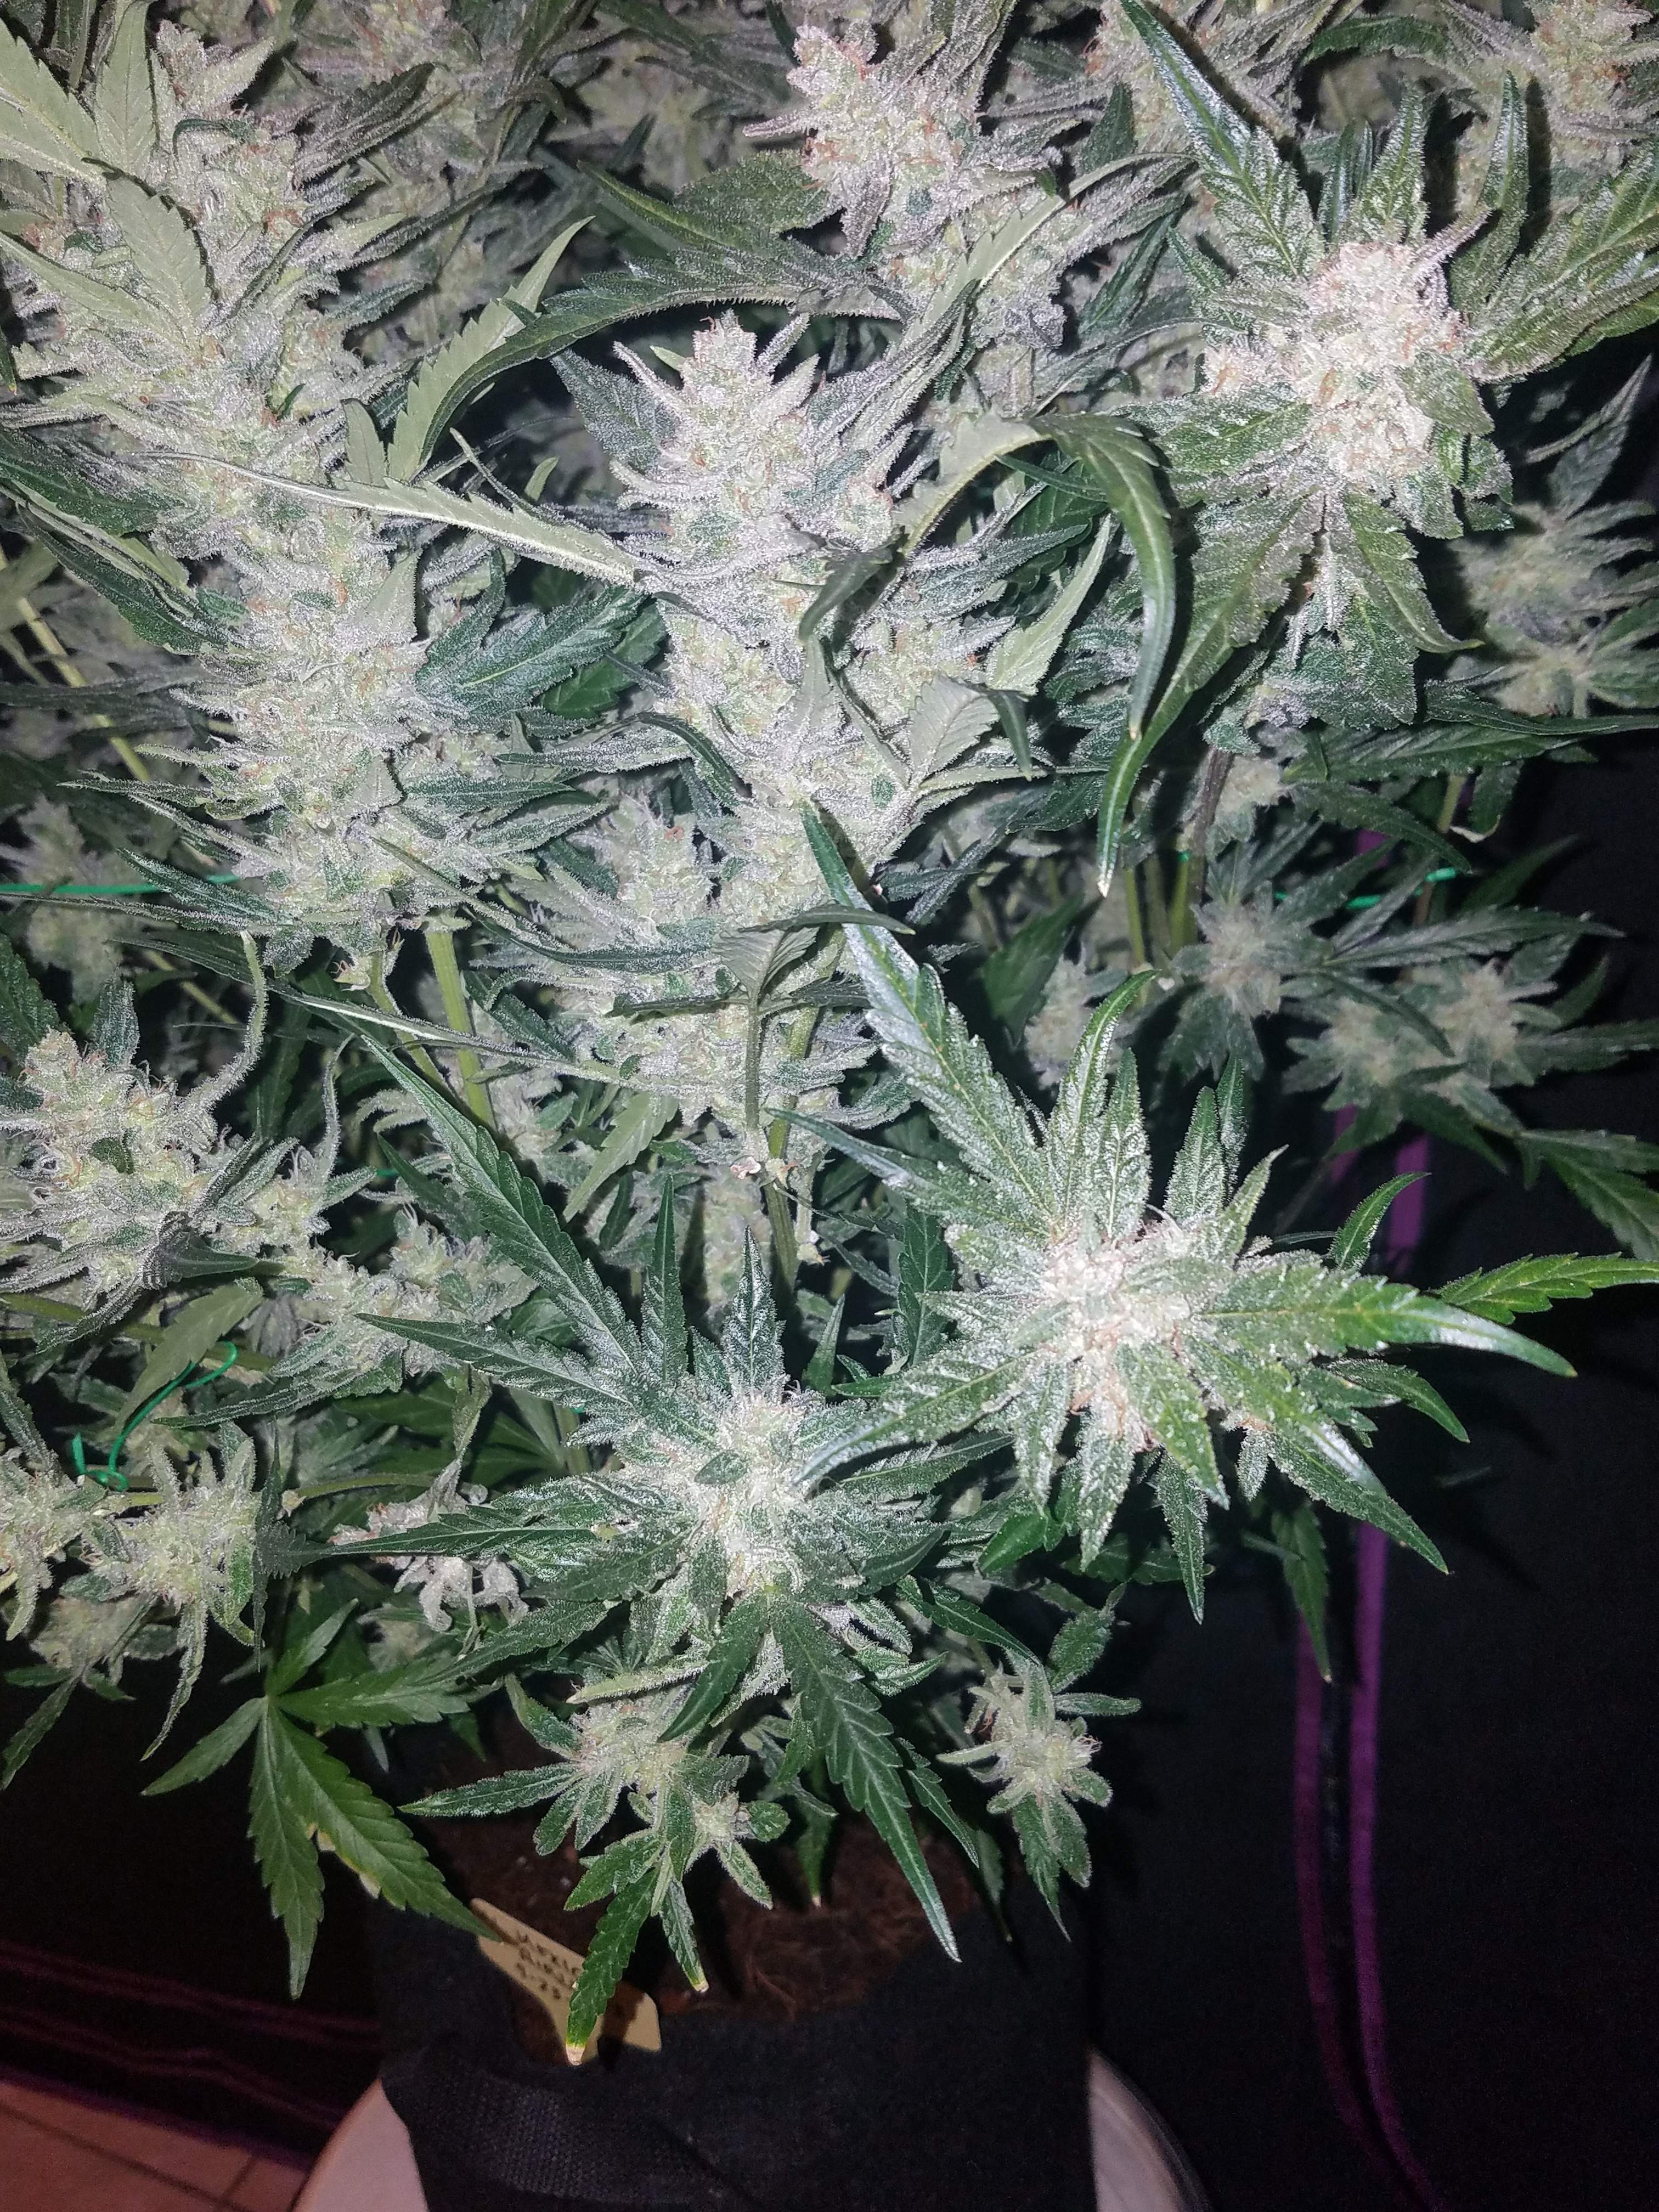 Mexican Airlines - Auto-Flower - Southern Oregon Seeds